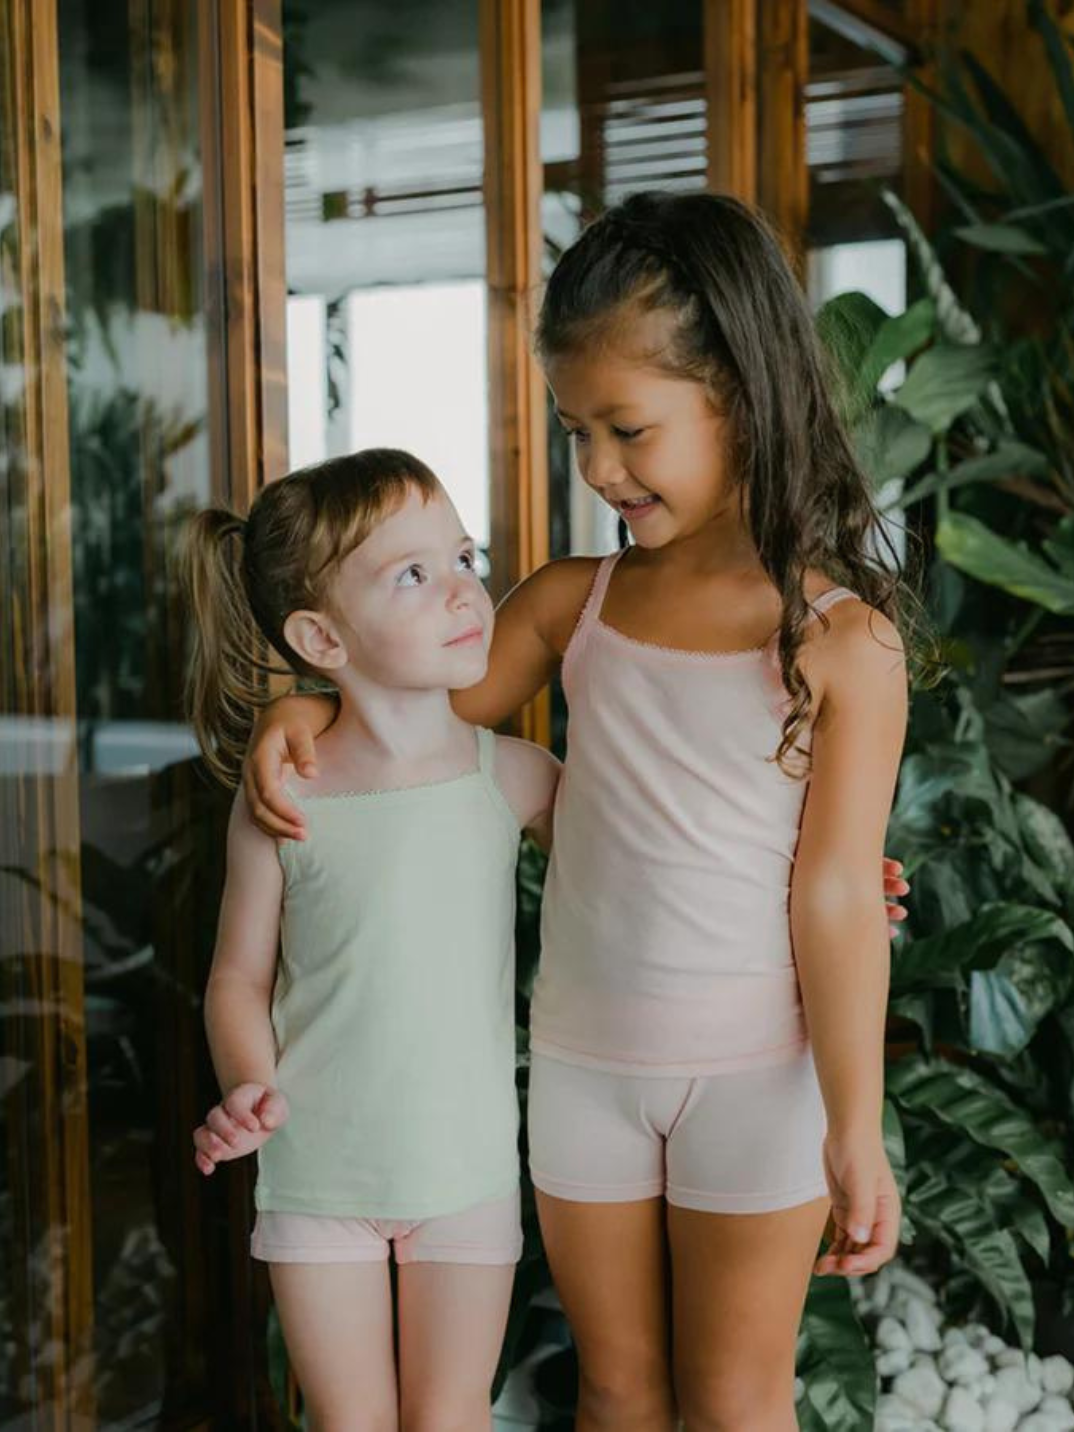 Just Peachy Camisoles are super soft and gentle on your little ones' skin. Designed with a snug fit for play, movement and a comfy night's rest. Add the breathable Camisole layer under your day clothes or snooze in maximum comfort. Pink and green children's camis. Comes in a 2-pack